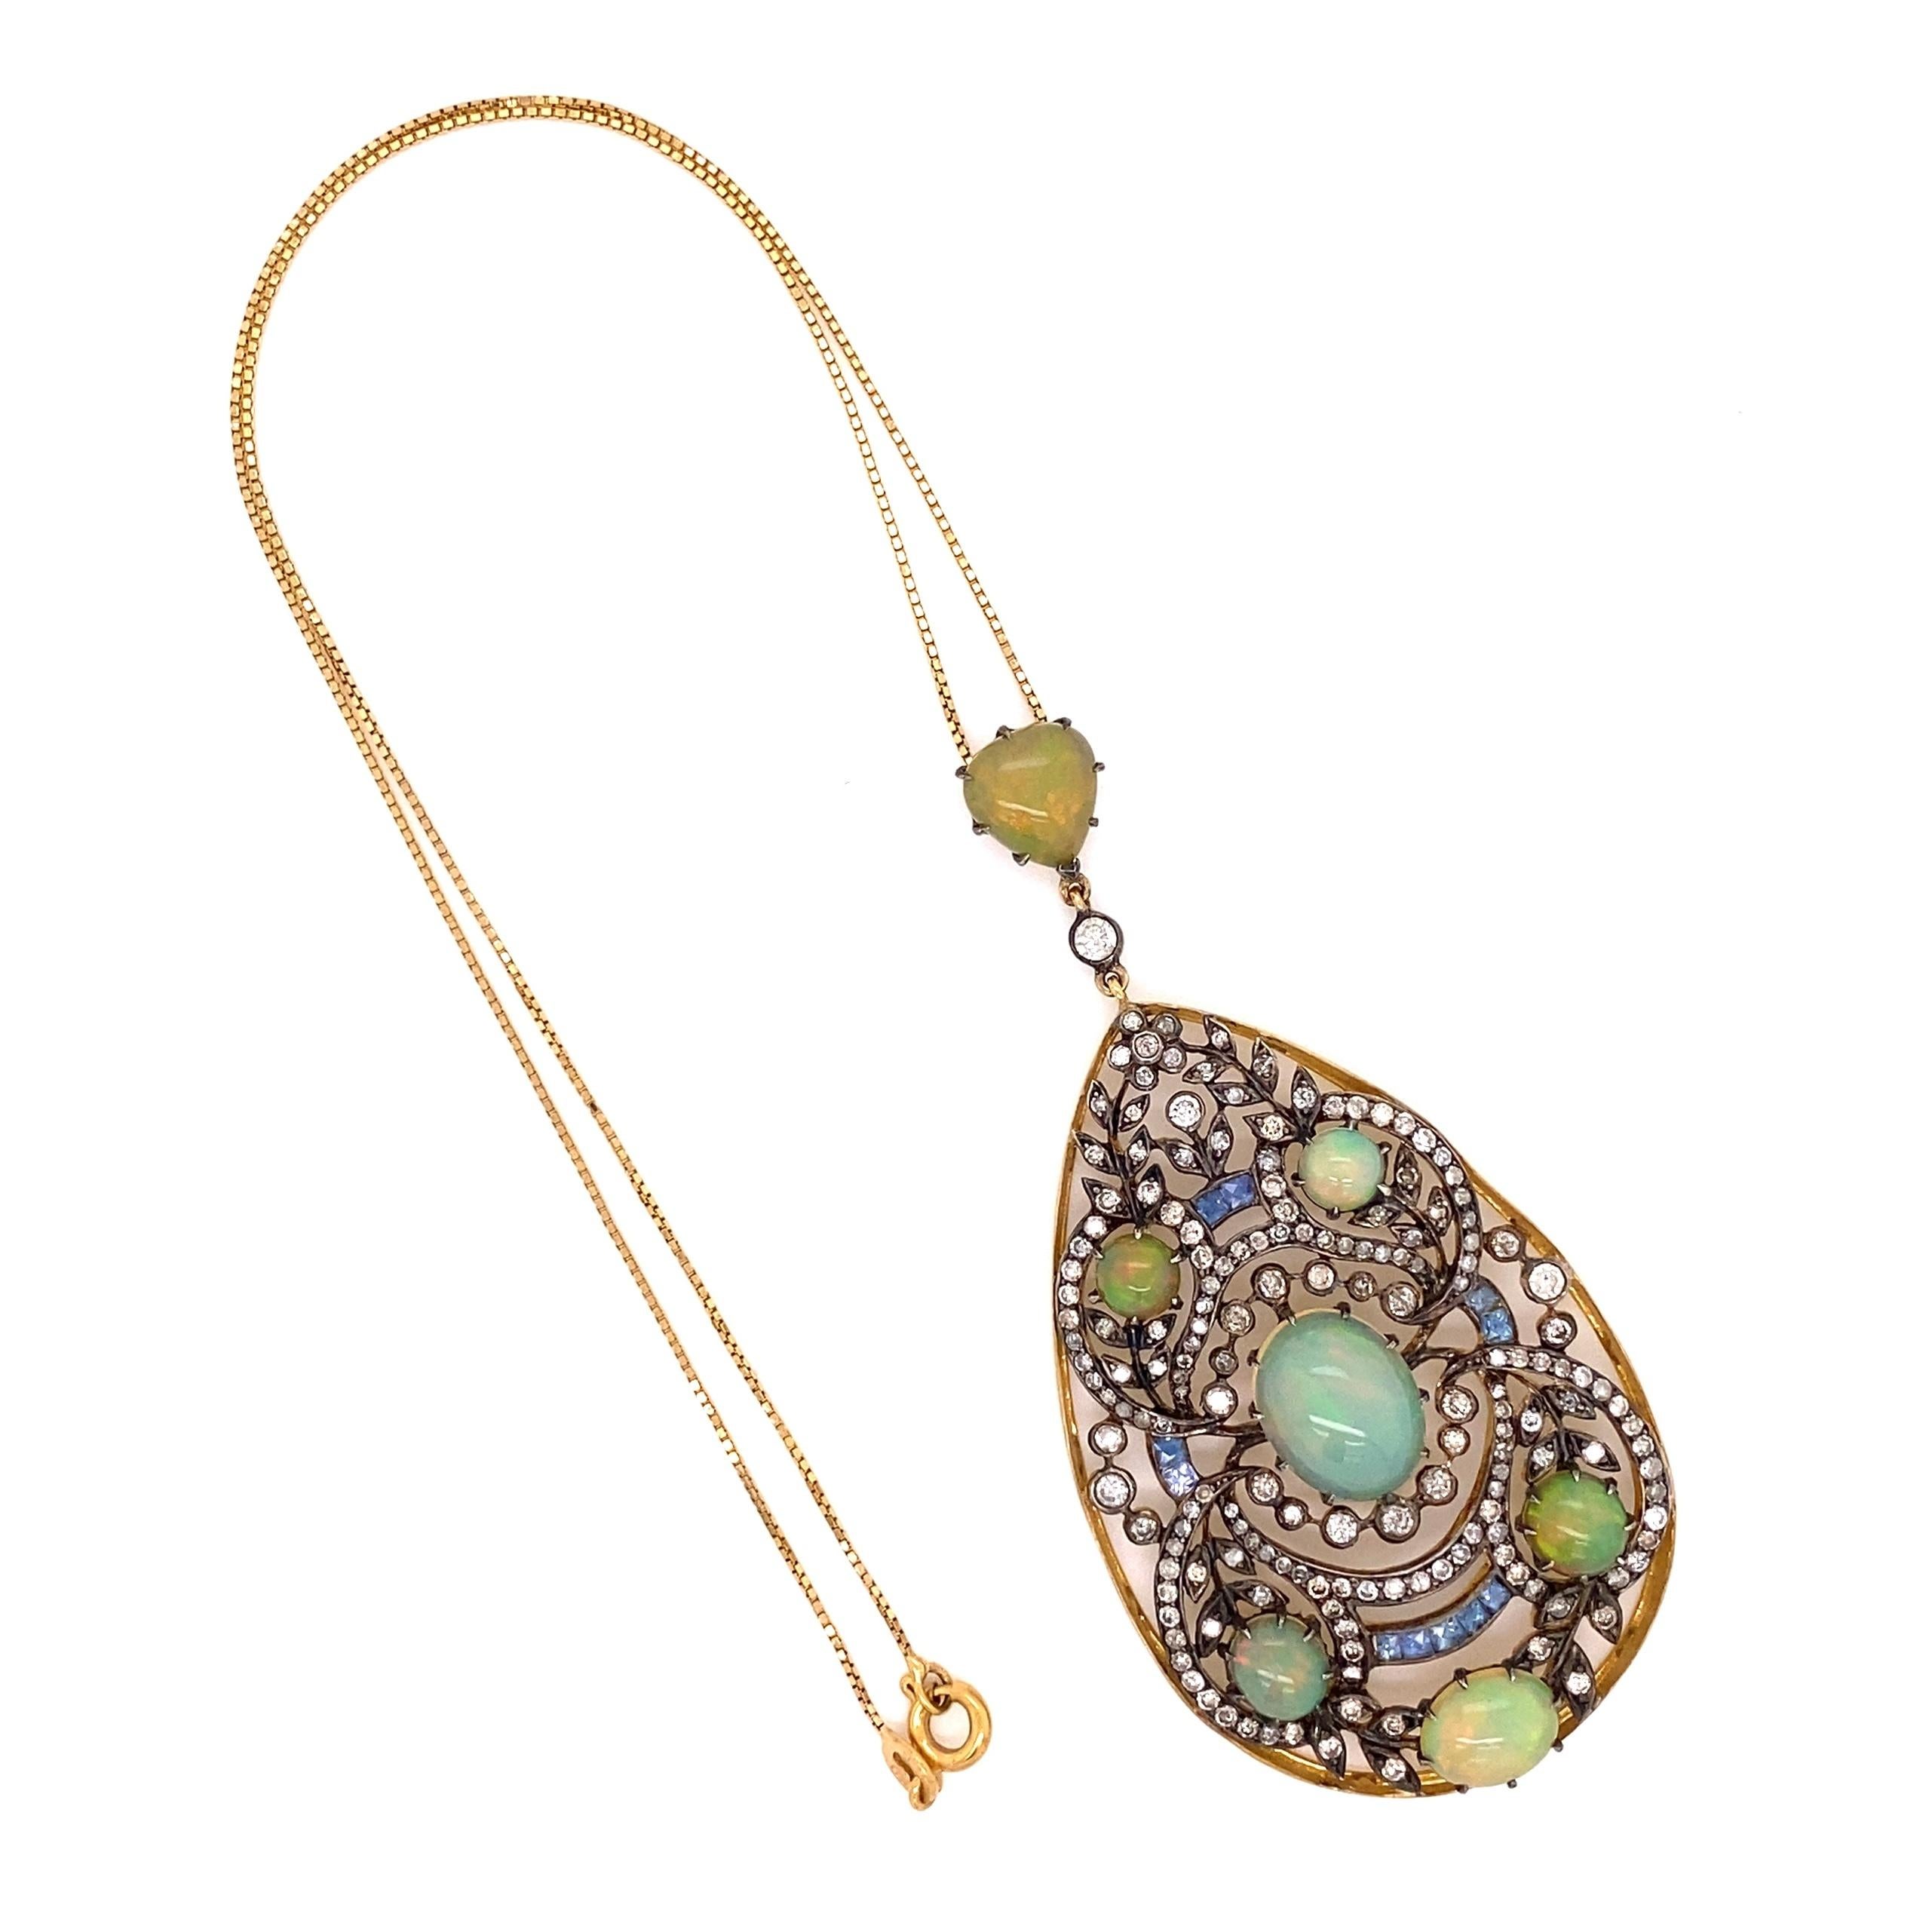 Simply Beautiful! Elegant and finely detailed Opal, Diamond and Sapphire Pendant Necklace suspended from a 15” long 18K Yellow Gold Chain. Securely Hand set with Opals, weighing approx. 8.53tcw, Diamonds, approx. 2.55tcw and Sapphires, approx.